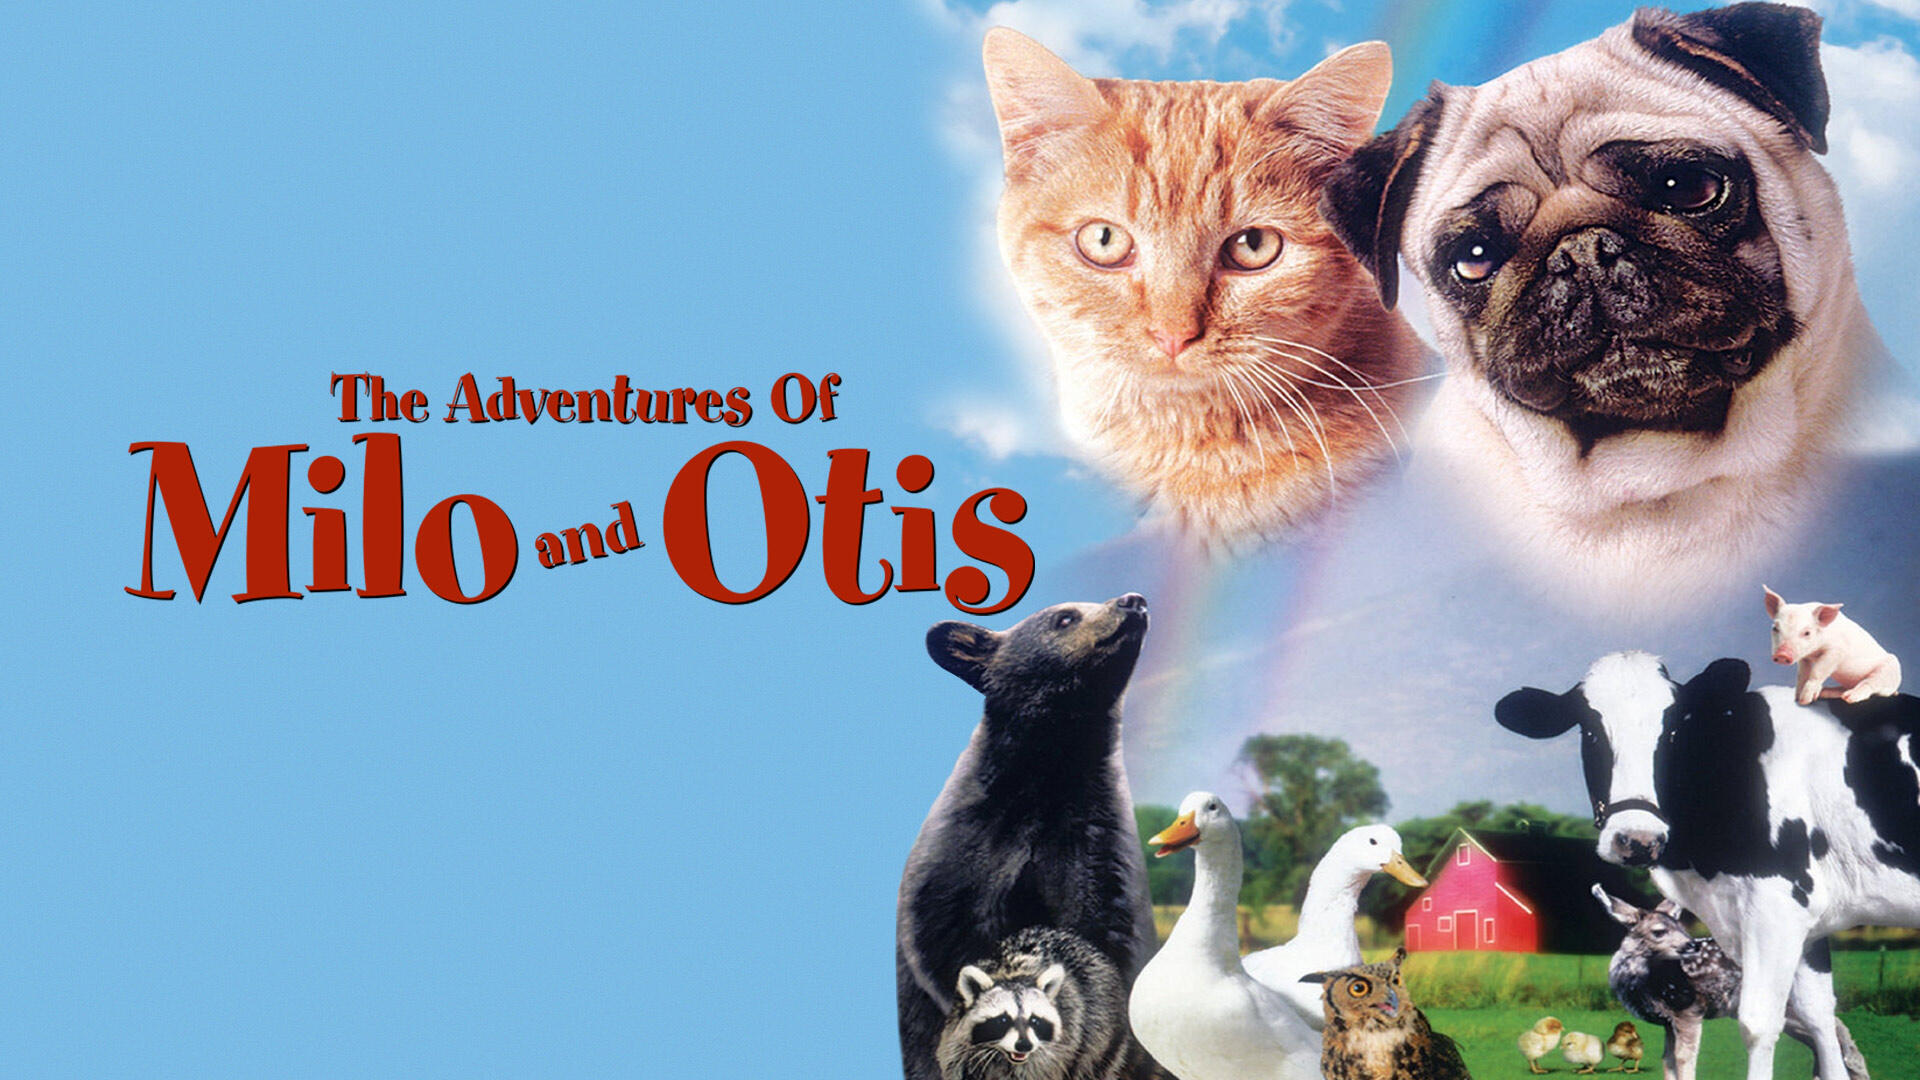 38-facts-about-the-movie-the-adventures-of-milo-and-otis